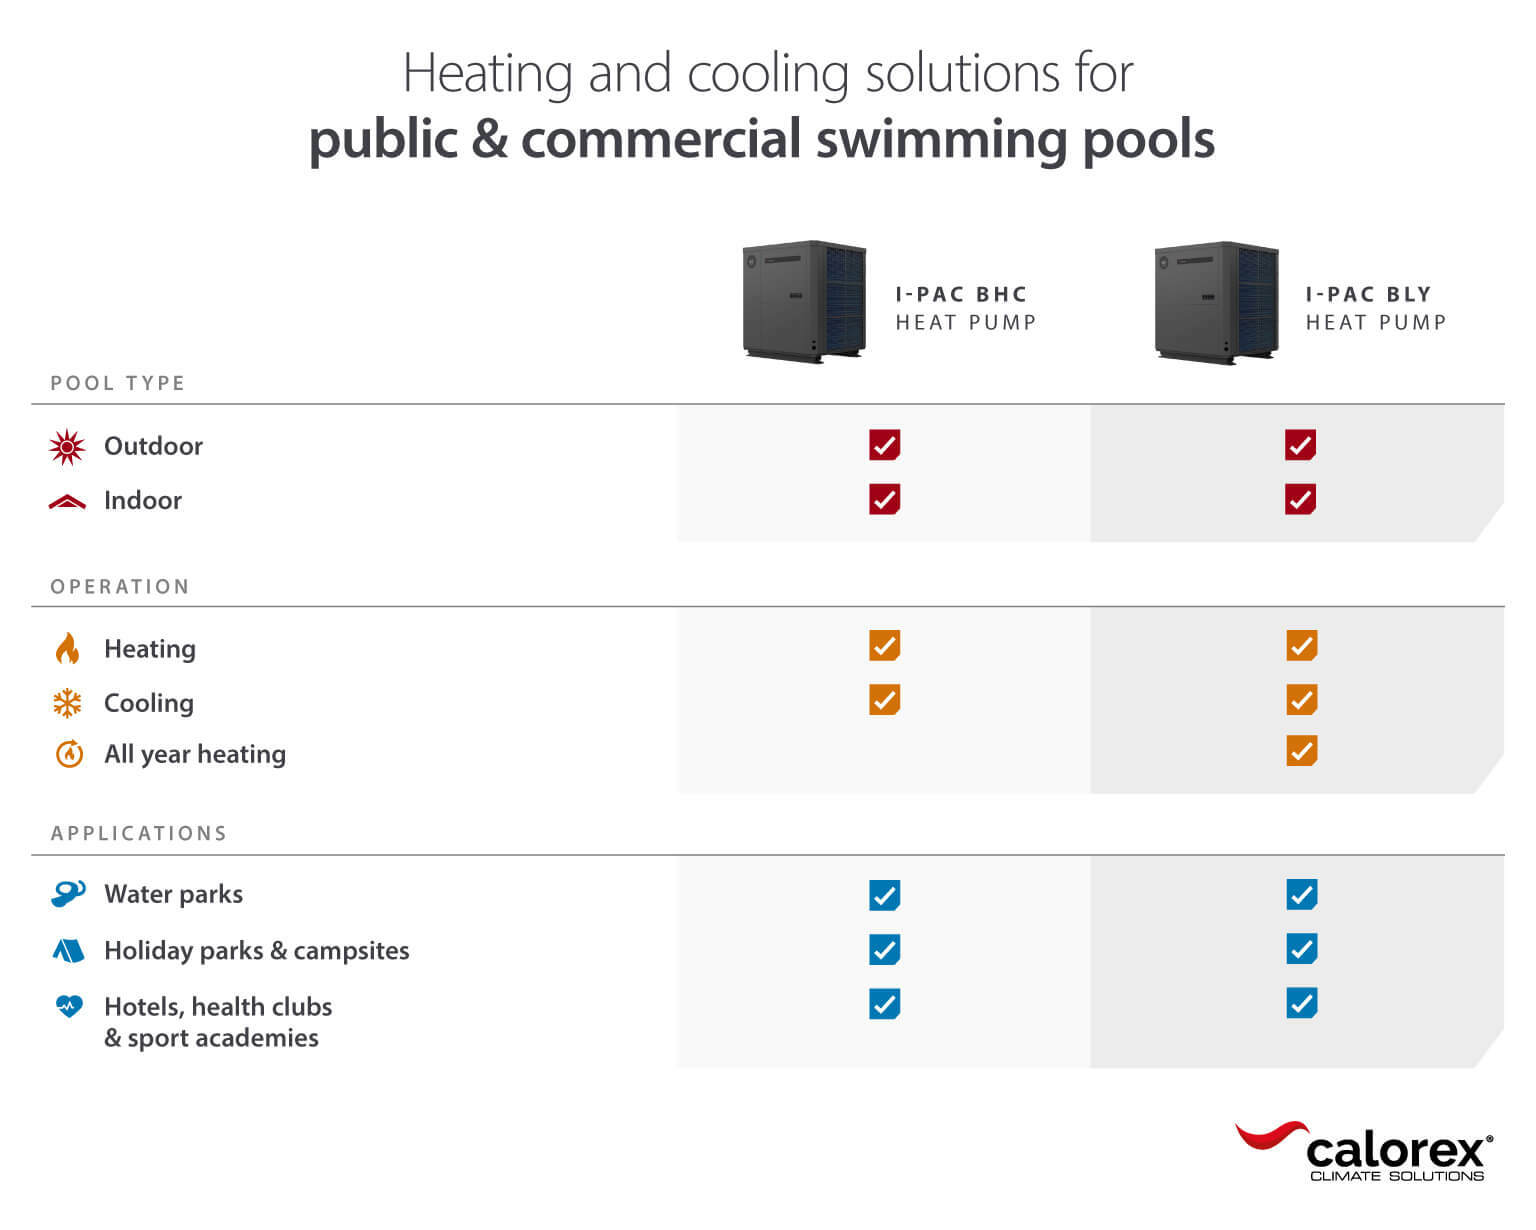 Commercial swimming pool heat pump models by Calorex for heating and cooling